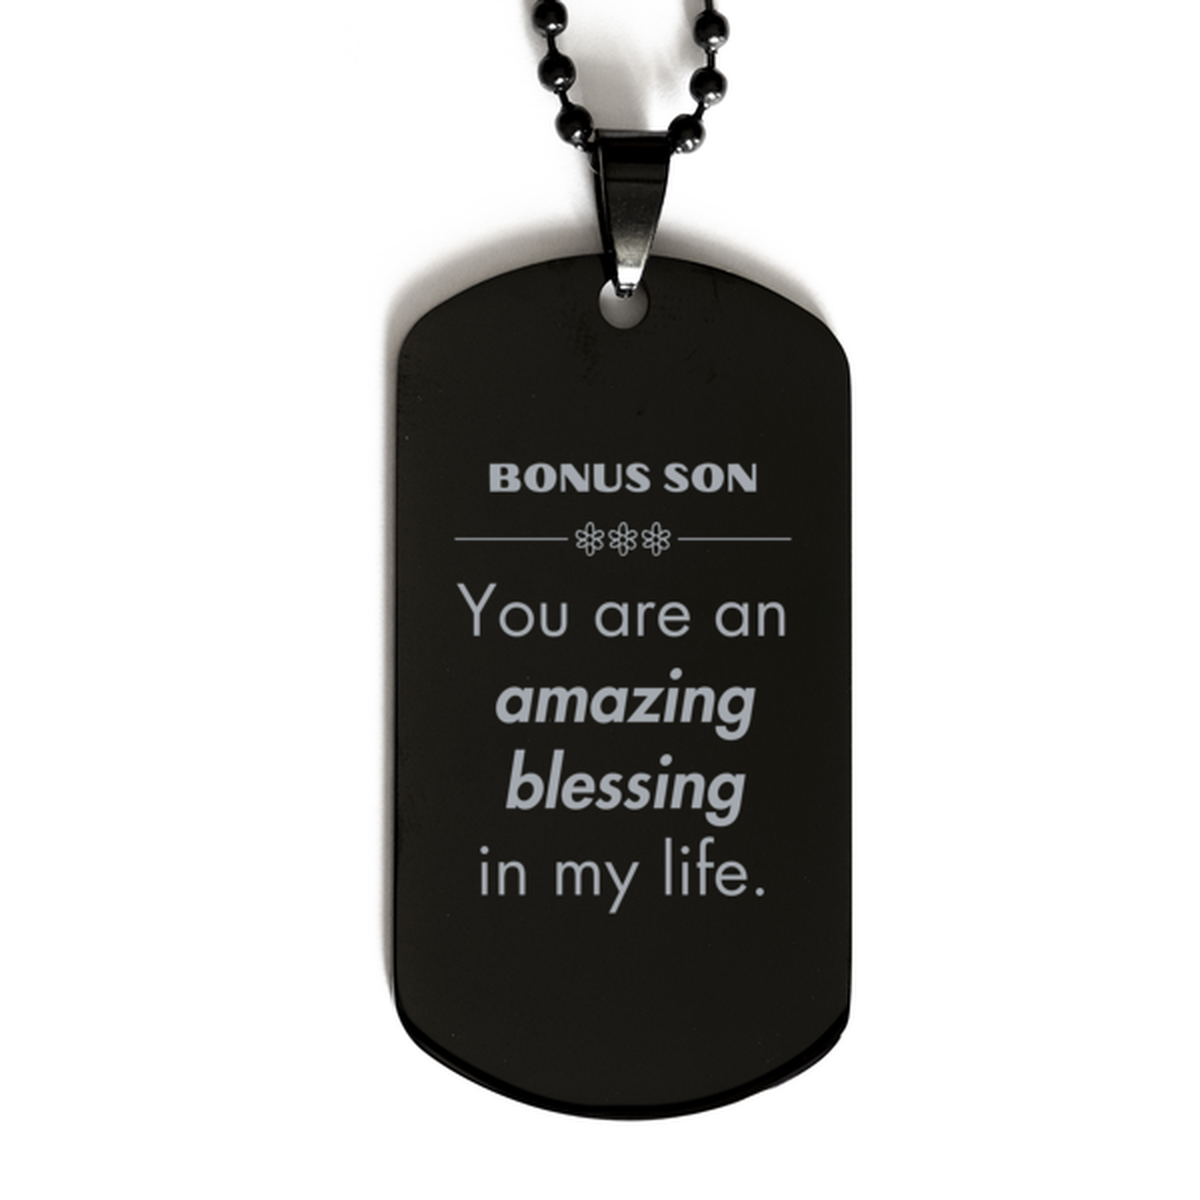 Bonus Son Black Dog Tag, You are an amazing blessing in my life, Thank You Gifts For Bonus Son, Inspirational Birthday Christmas Unique Gifts For Bonus Son